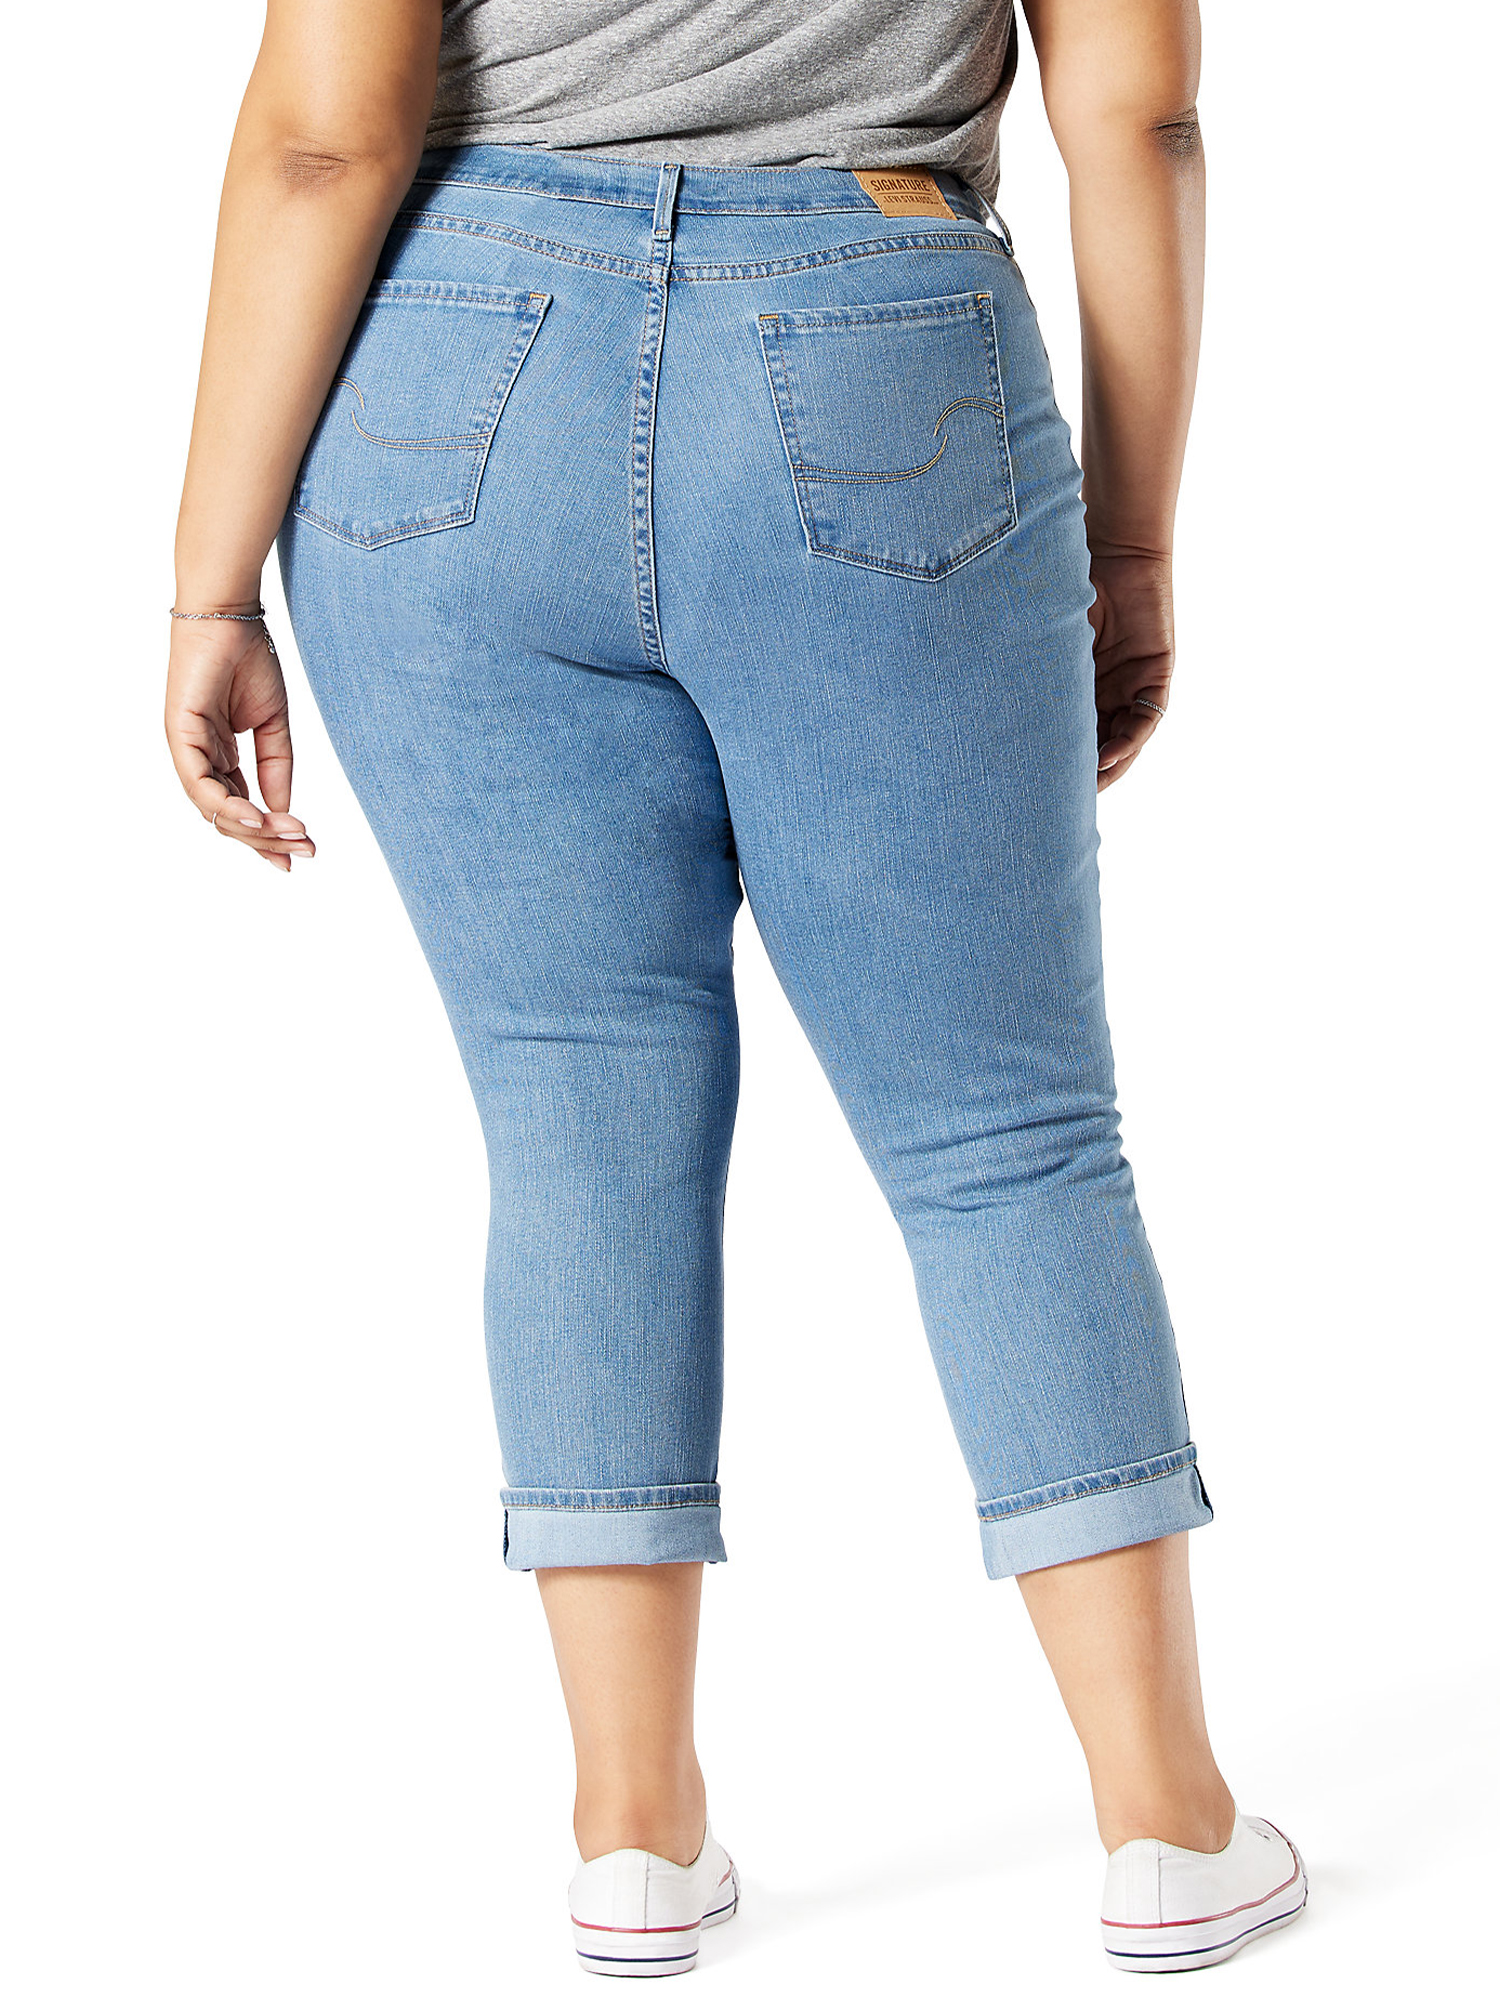 Signature by Levi Strauss & Co. Women's and Women's Plus Mid Rise Capri Jeans, Sizes 0-28 - image 5 of 7